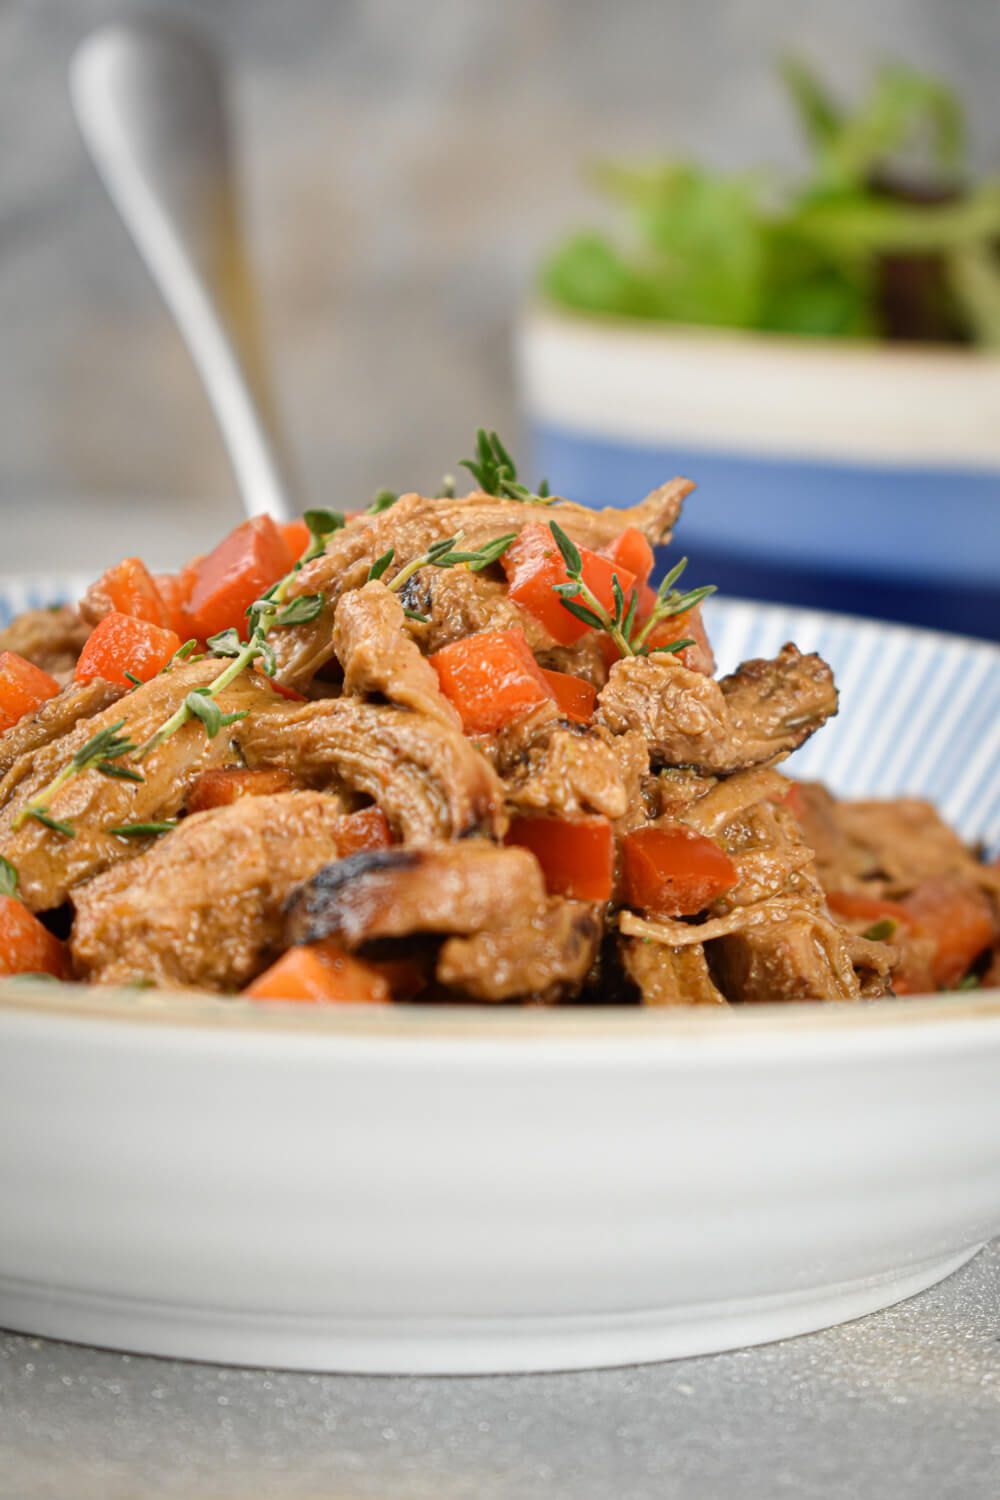 Slow cooker paprikash with pork, tomatoes, peppers, and sour cream in a bowl.